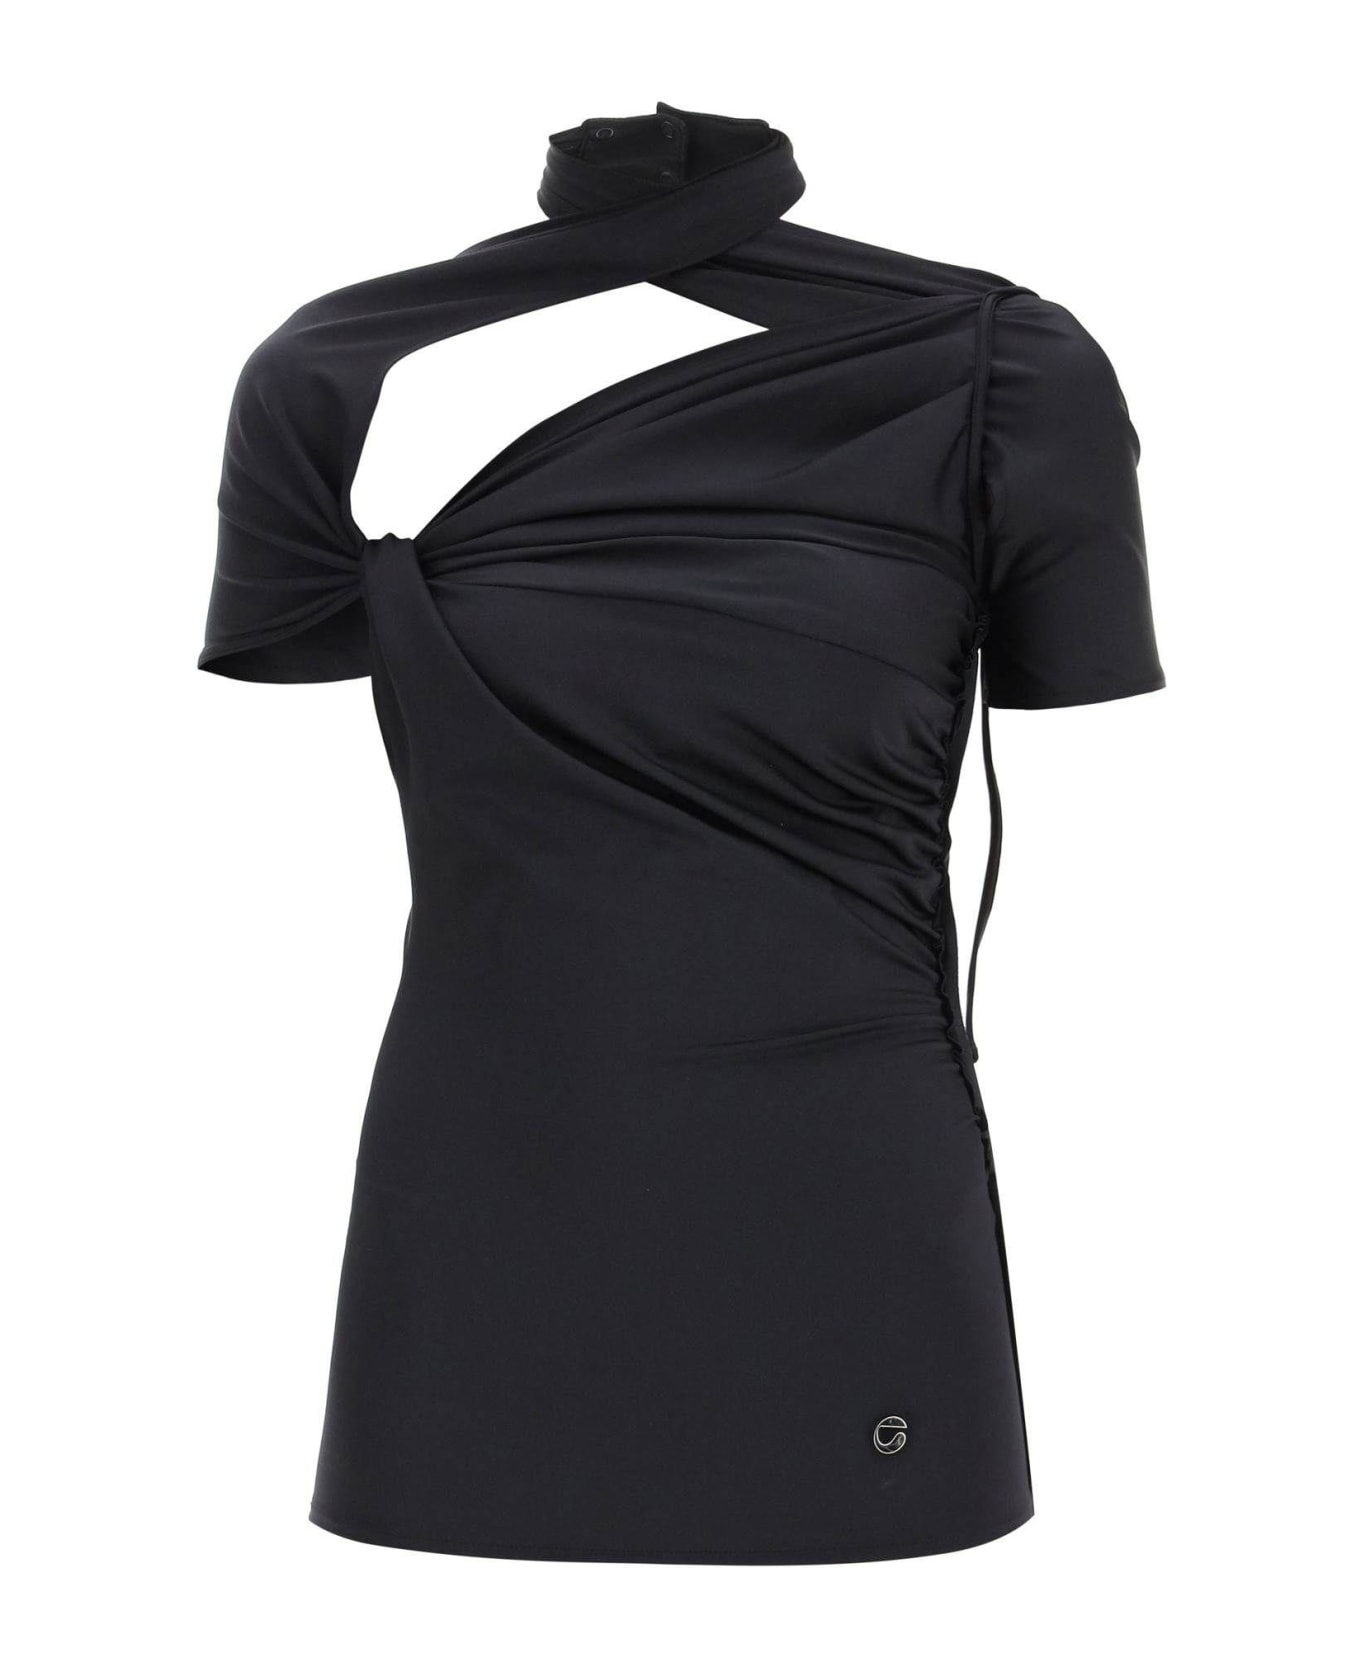 Coperni Top With Knotted Details - Black